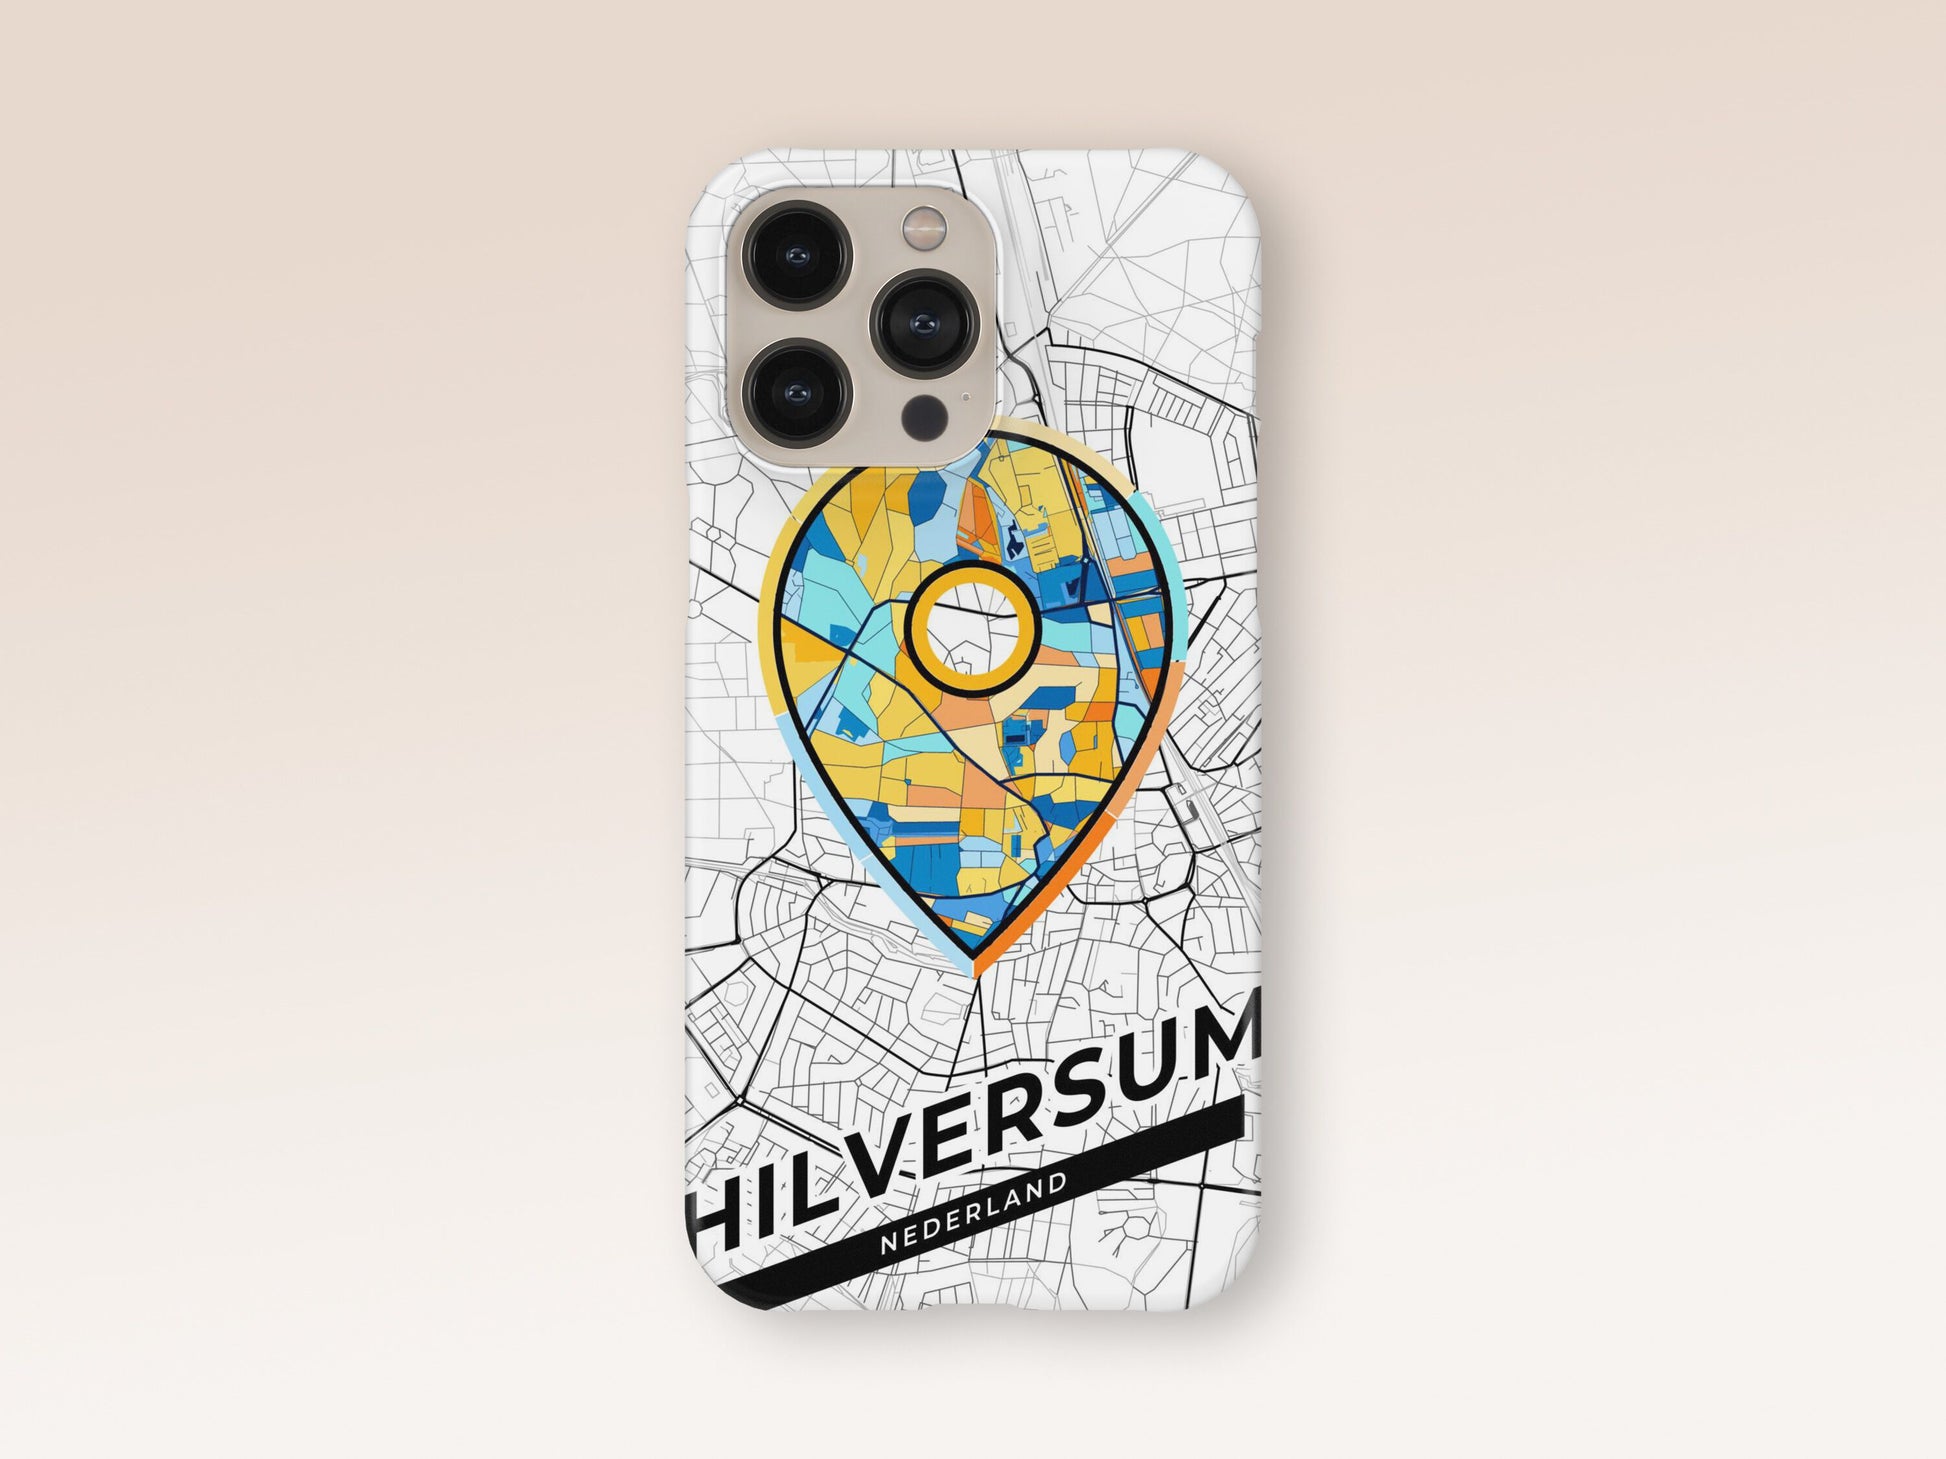 Hilversum Netherlands slim phone case with colorful icon. Birthday, wedding or housewarming gift. Couple match cases. 1